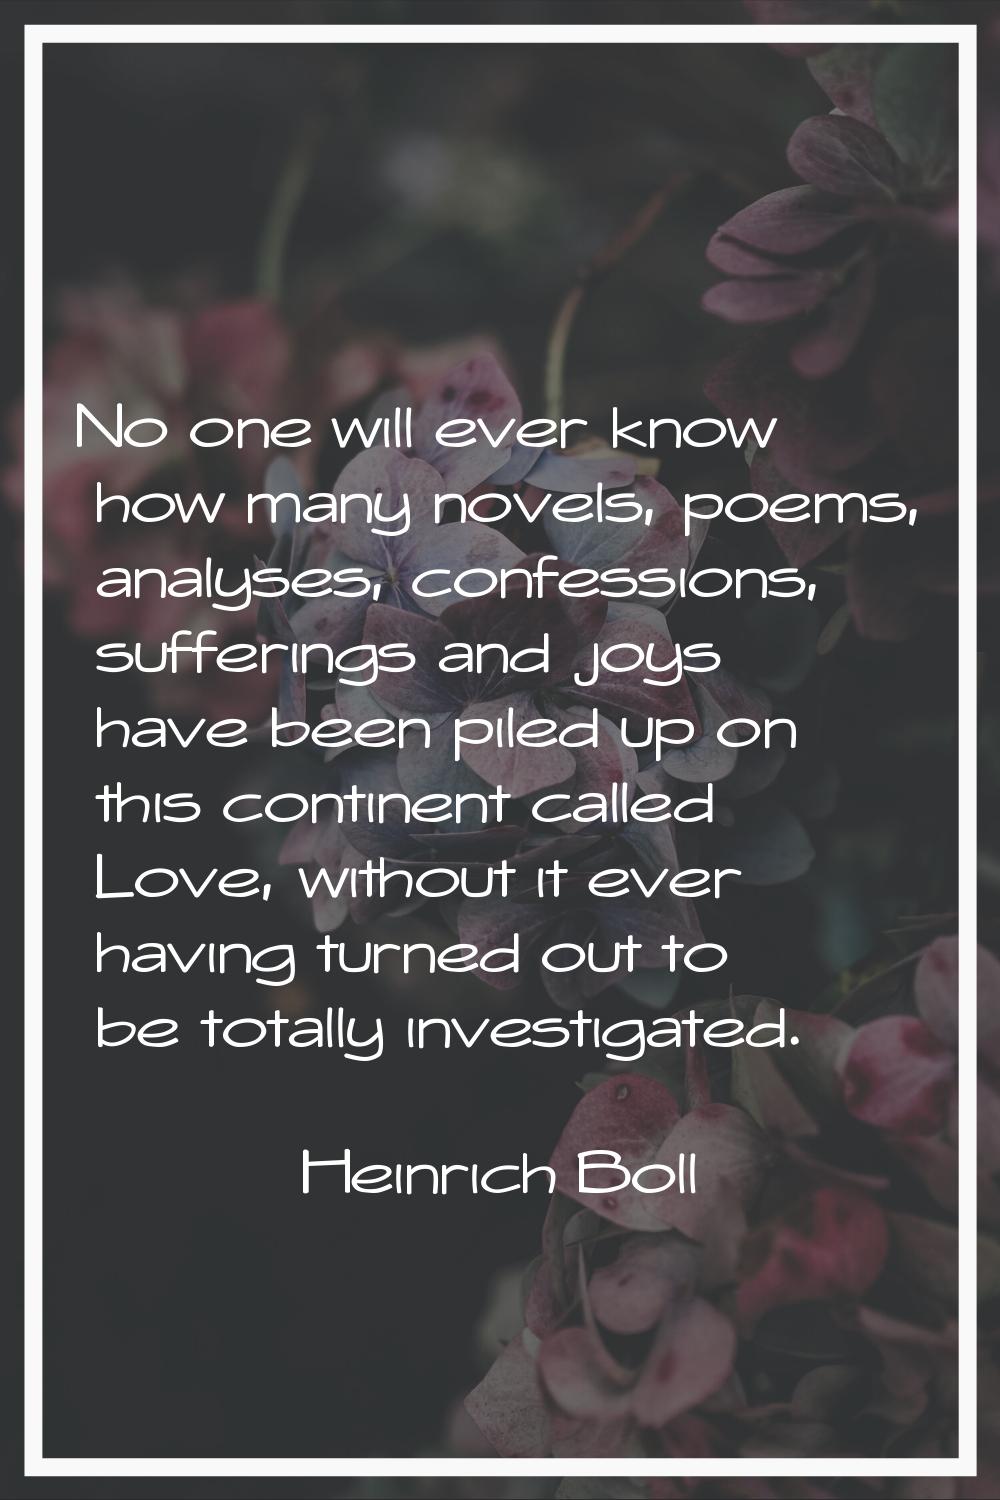 No one will ever know how many novels, poems, analyses, confessions, sufferings and joys have been 